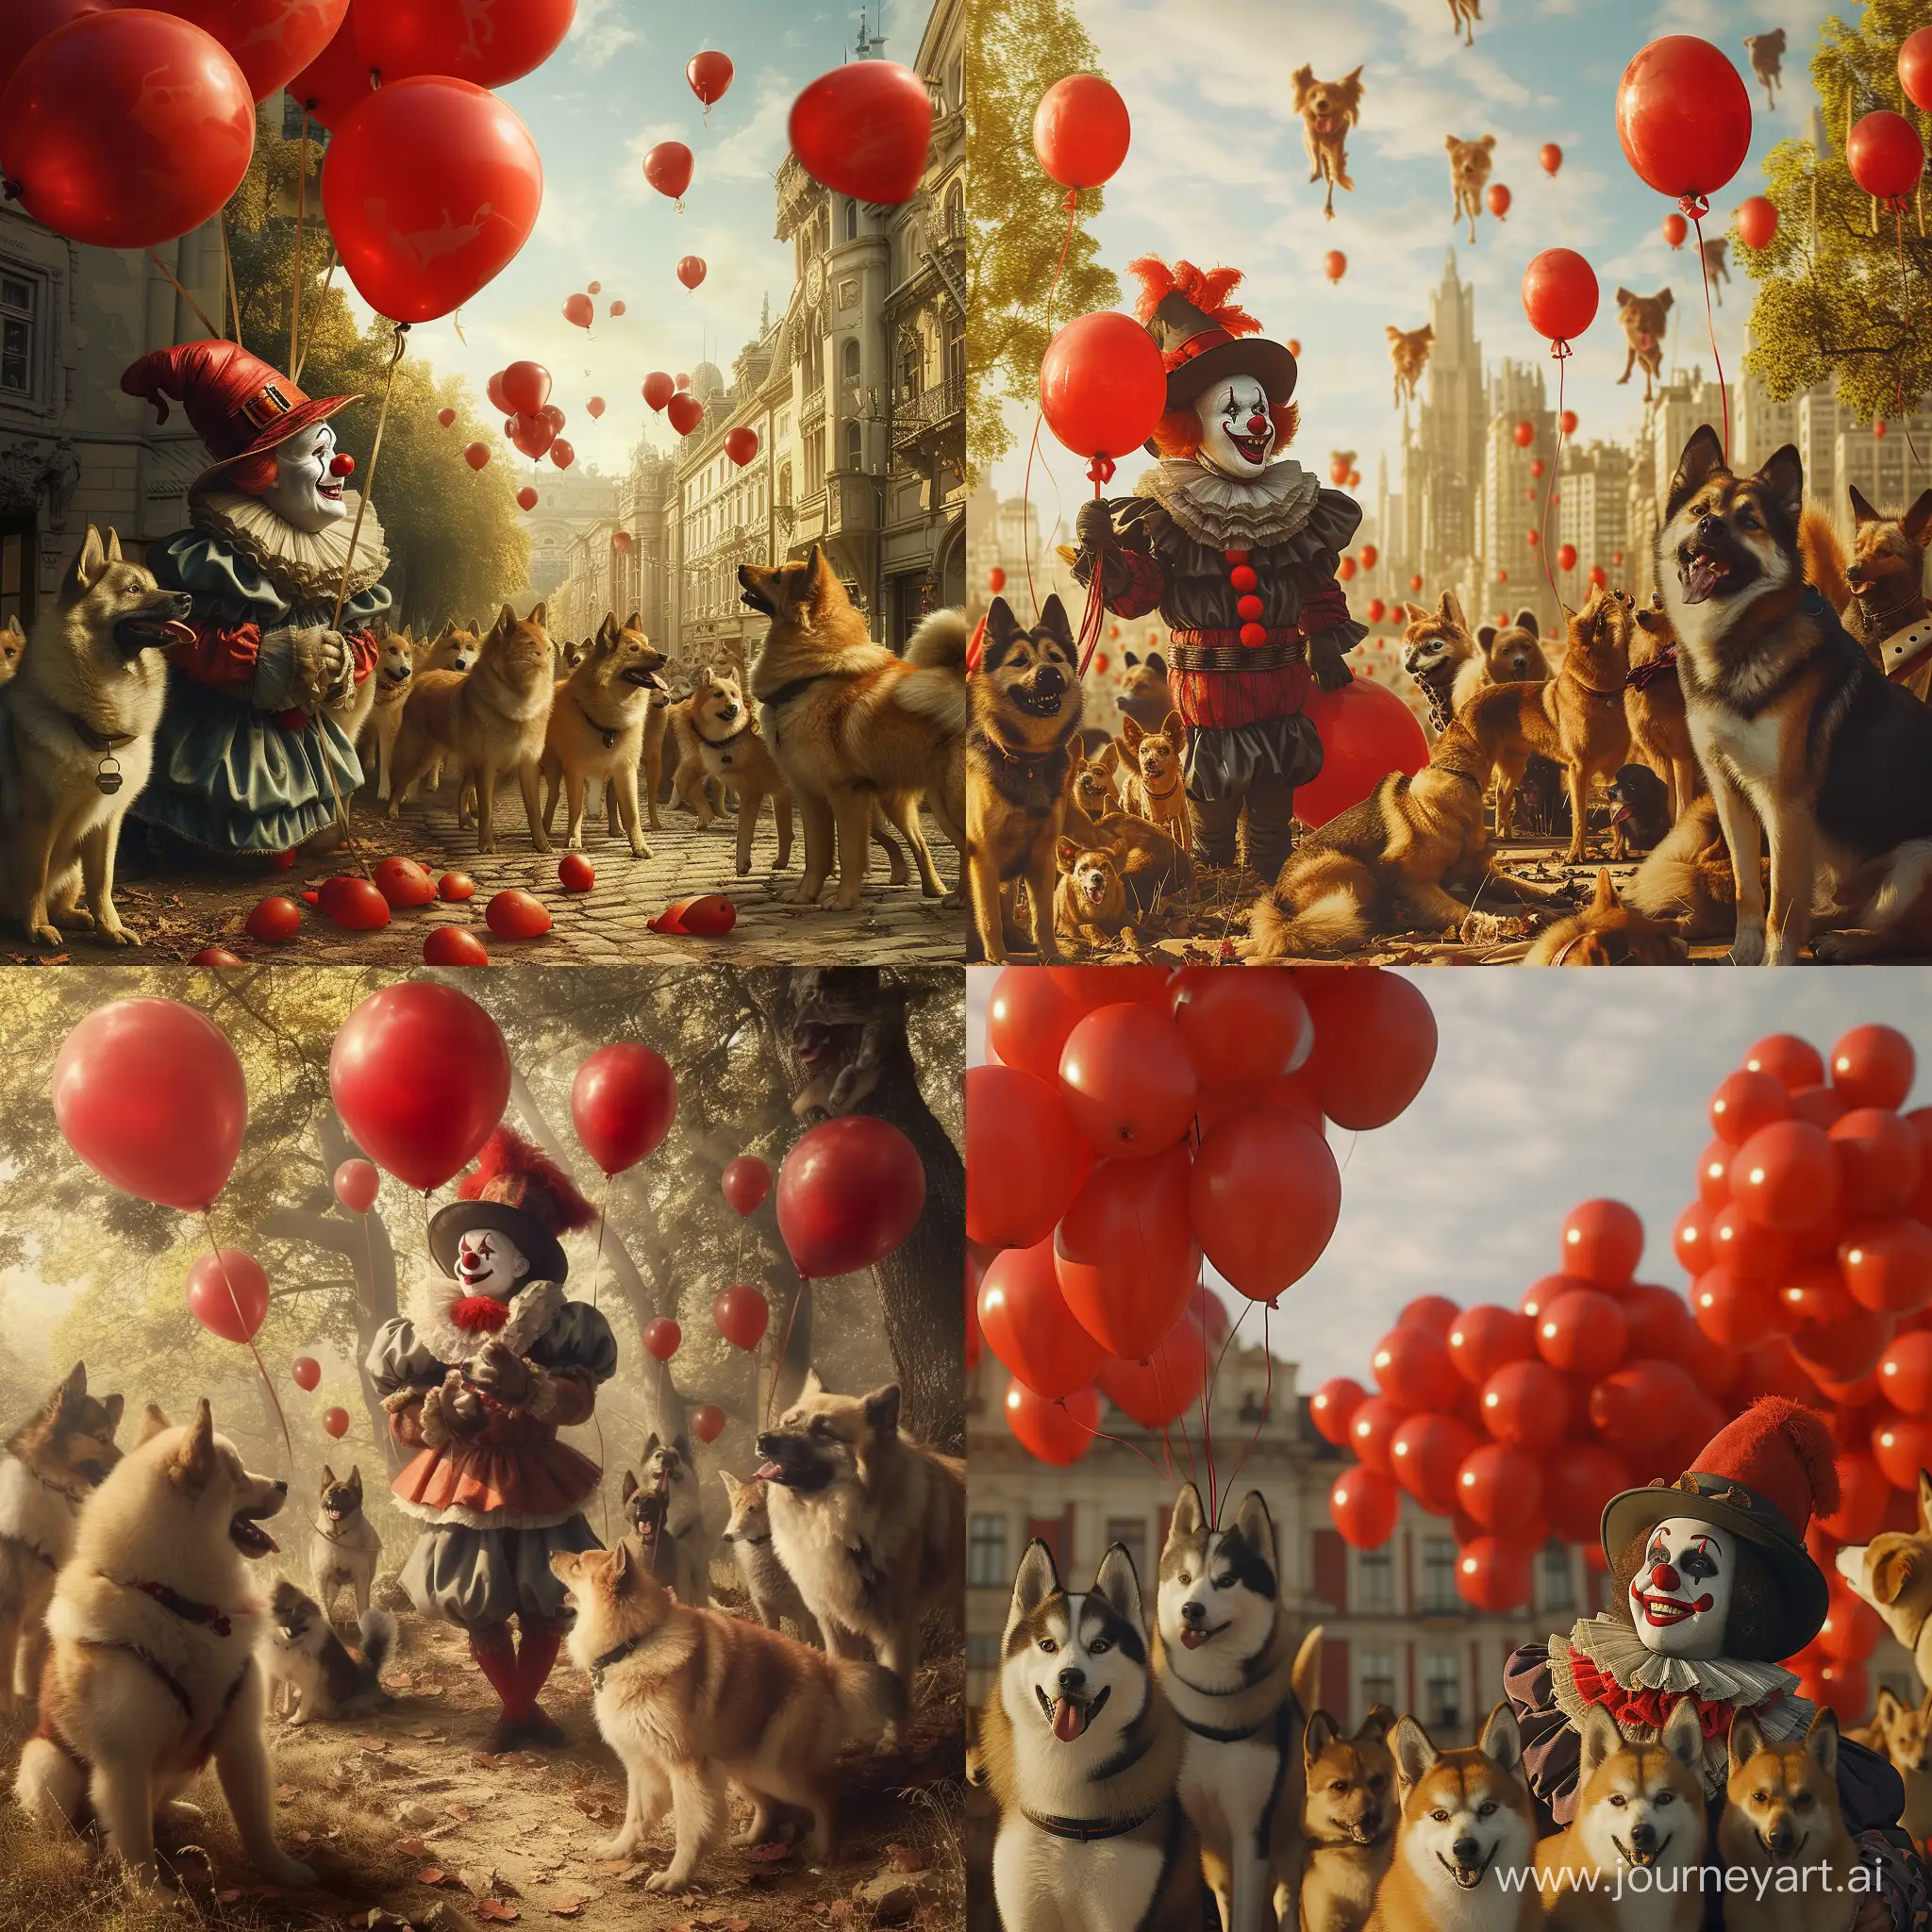 Cheerful-Clown-Surrounded-by-Playful-Spitz-Dogs-and-Red-Balloons